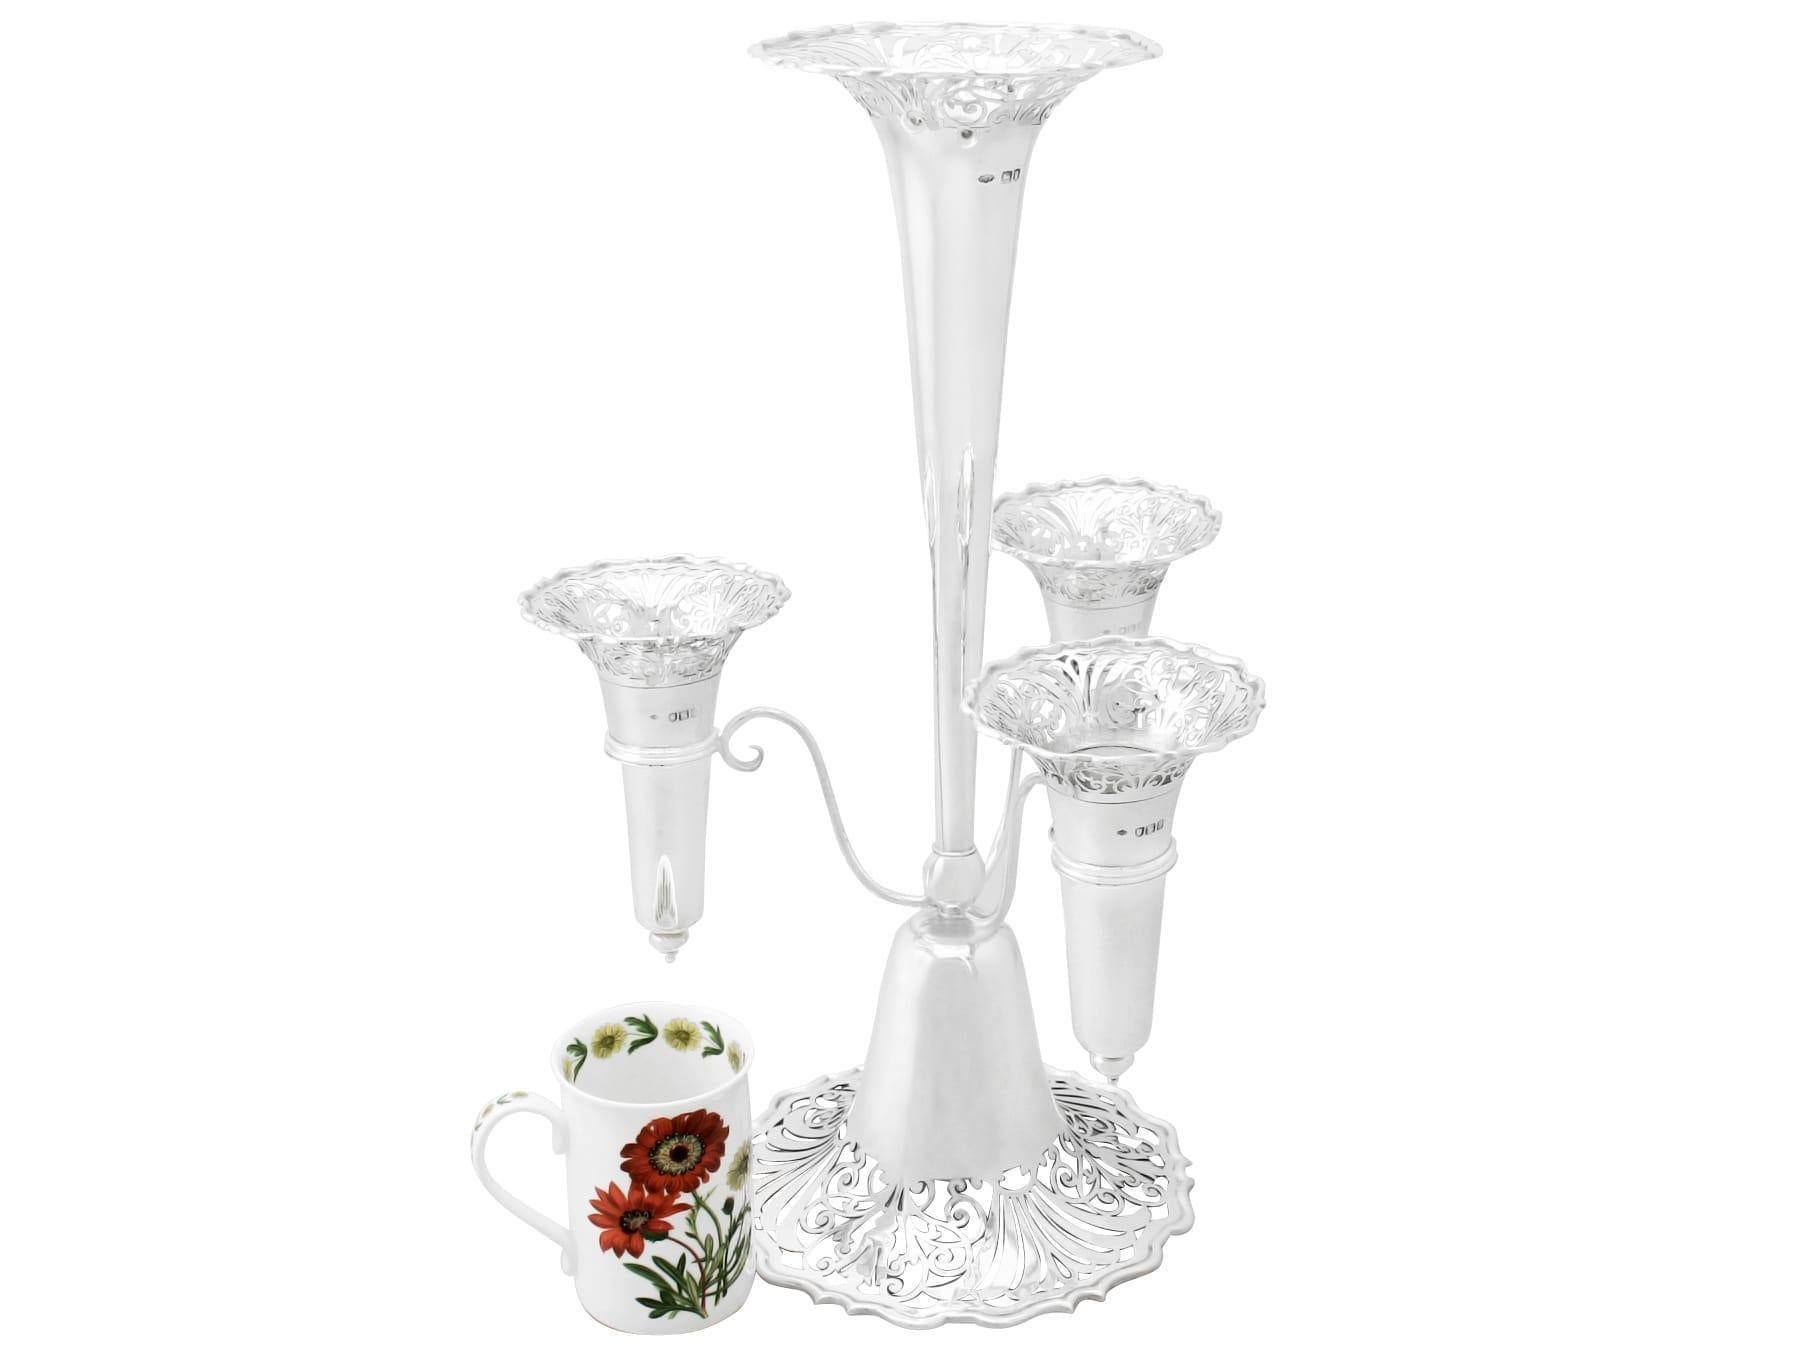 A fine and impressive antique Edwardian English sterling silver epergne or centerpiece; part of our ornamental silverware collection.

This antique Edwardian sterling silver epergne or centerpiece has a plain, tapering form with a flared rim onto a